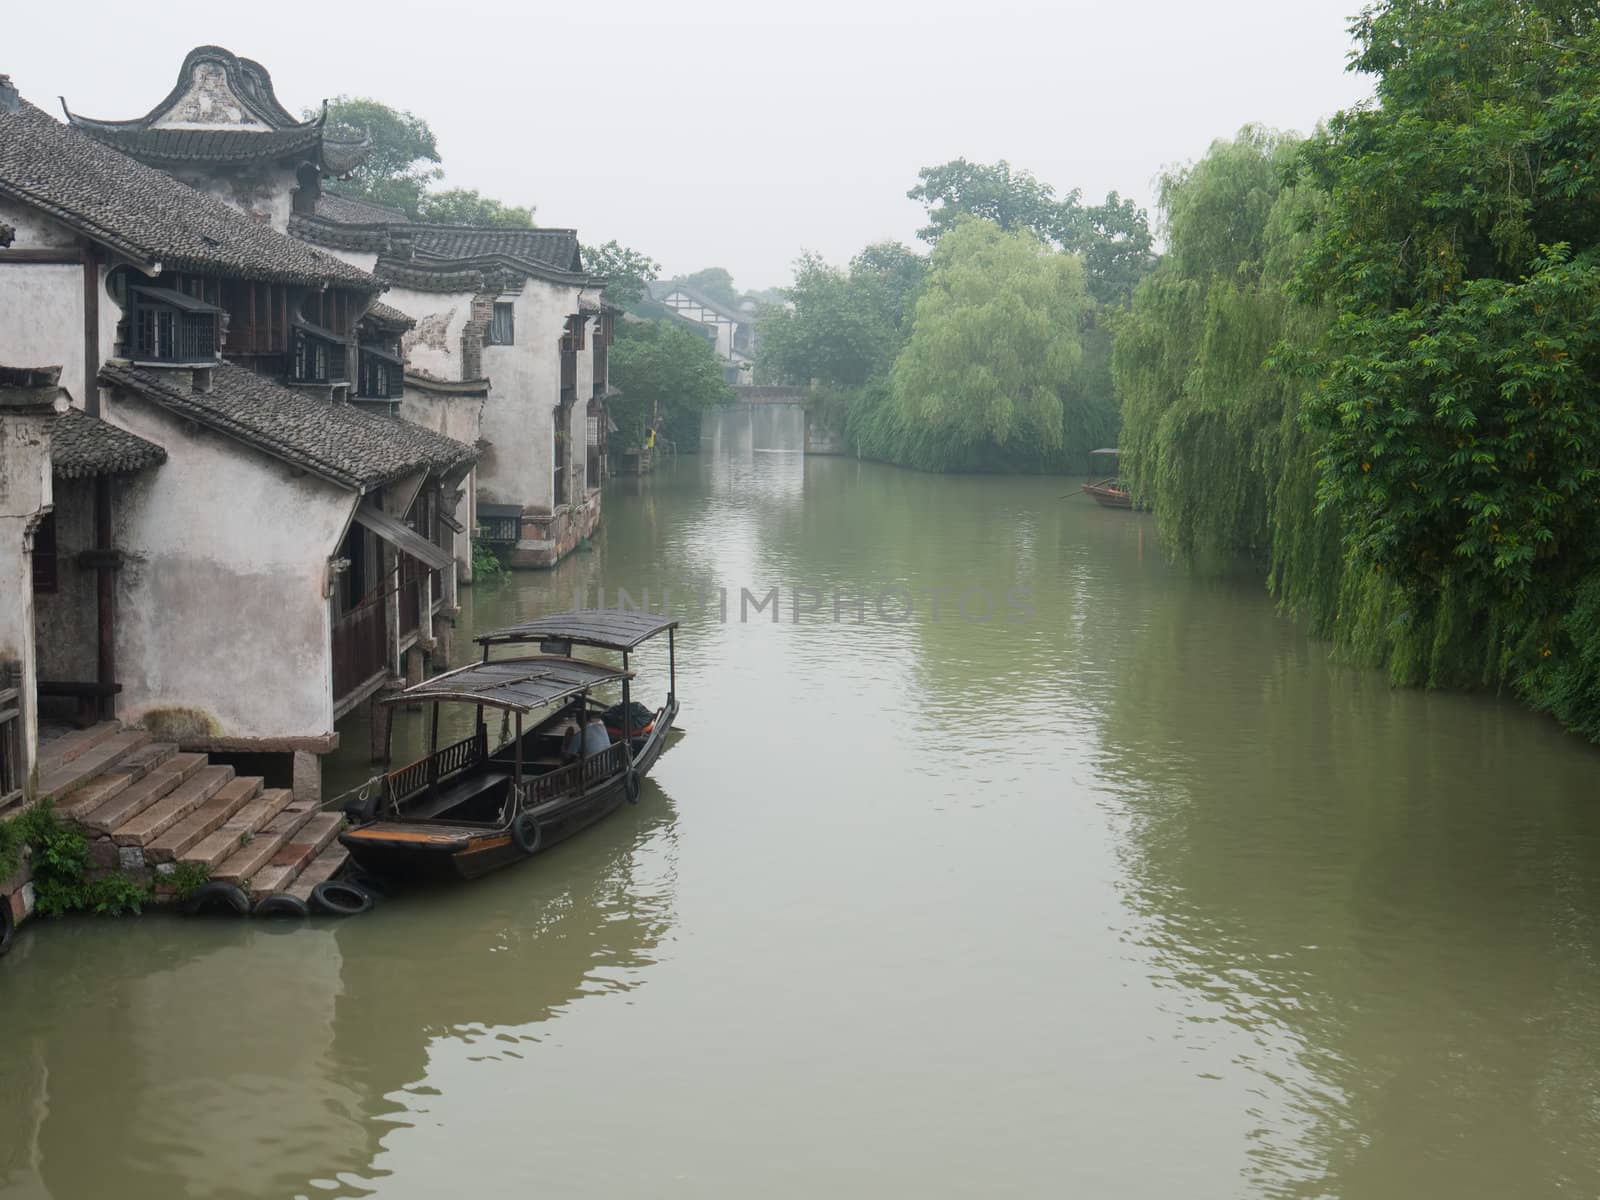 China ancient building in Wuzhen town by raywoo